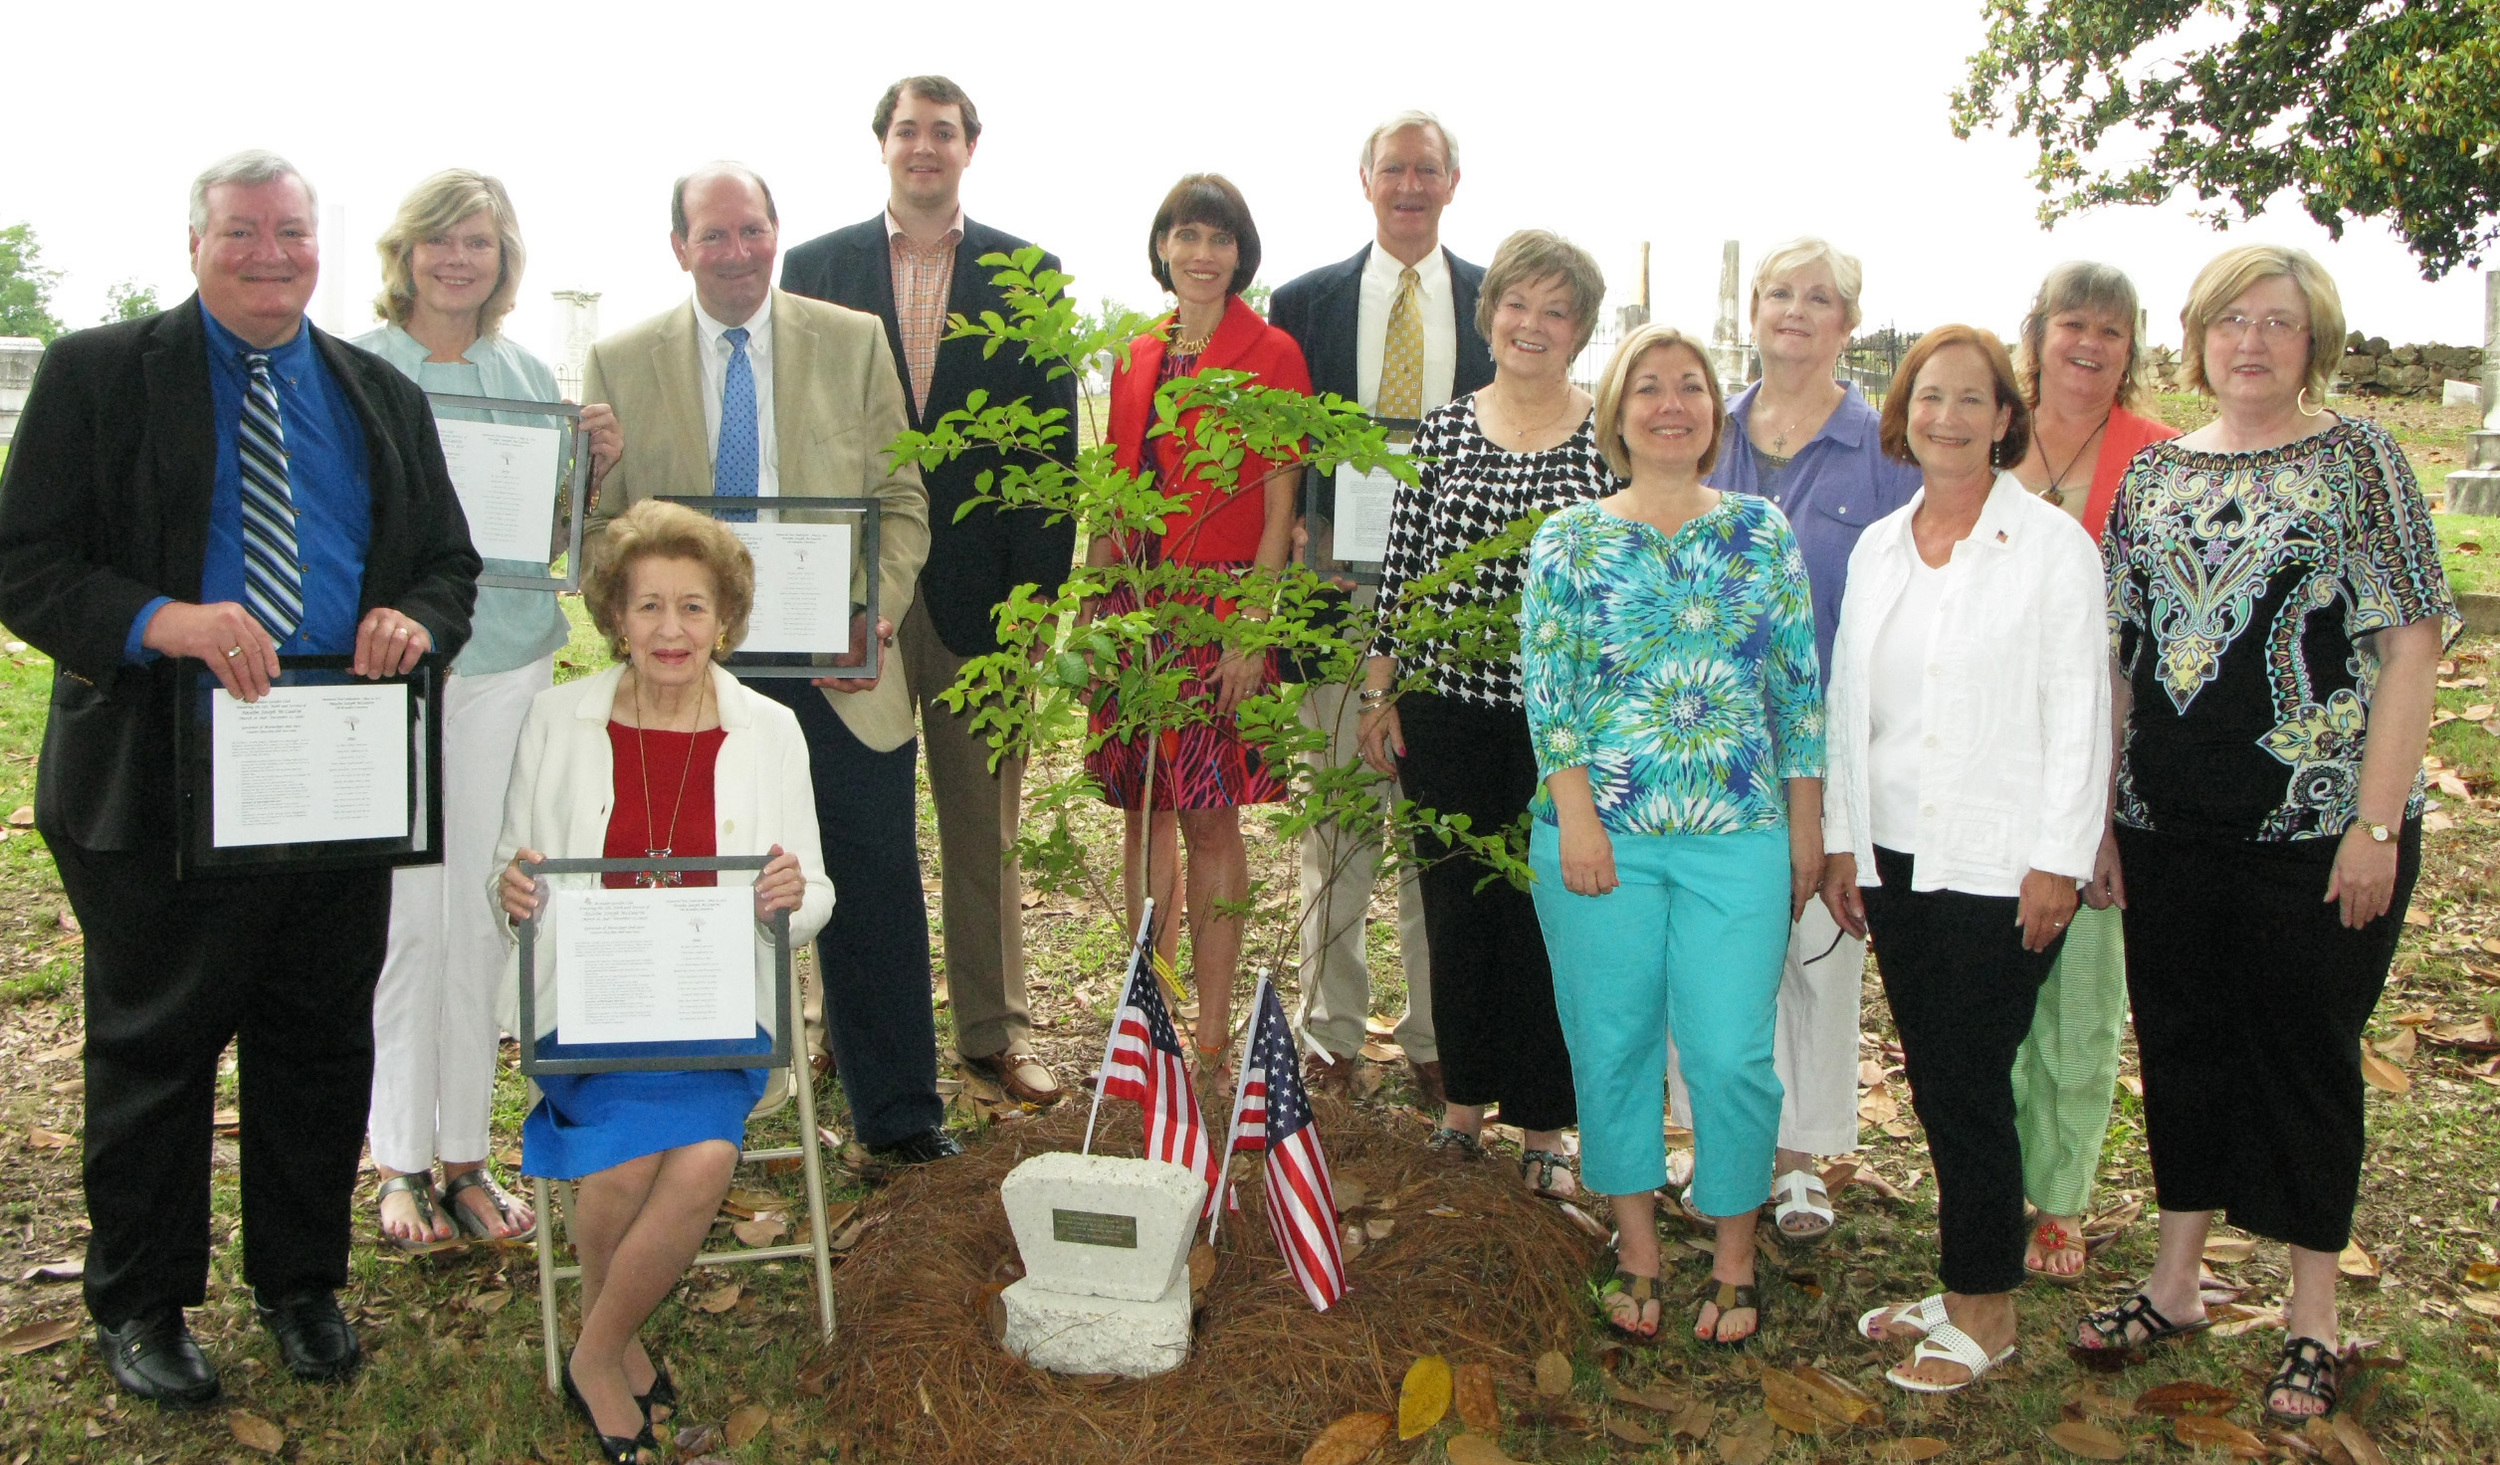   MEMORIAL&nbsp;TREE&nbsp;HONORS GOVERNOR ANSELM MCLAURIN    &nbsp;&nbsp; Brandon Garden Club (BGC), The Garden Clubs of Mississippi, Inc., planted a&nbsp;tree&nbsp;and placed a plaque in Old Brandon Cemetery honoring the life, work, and service of A